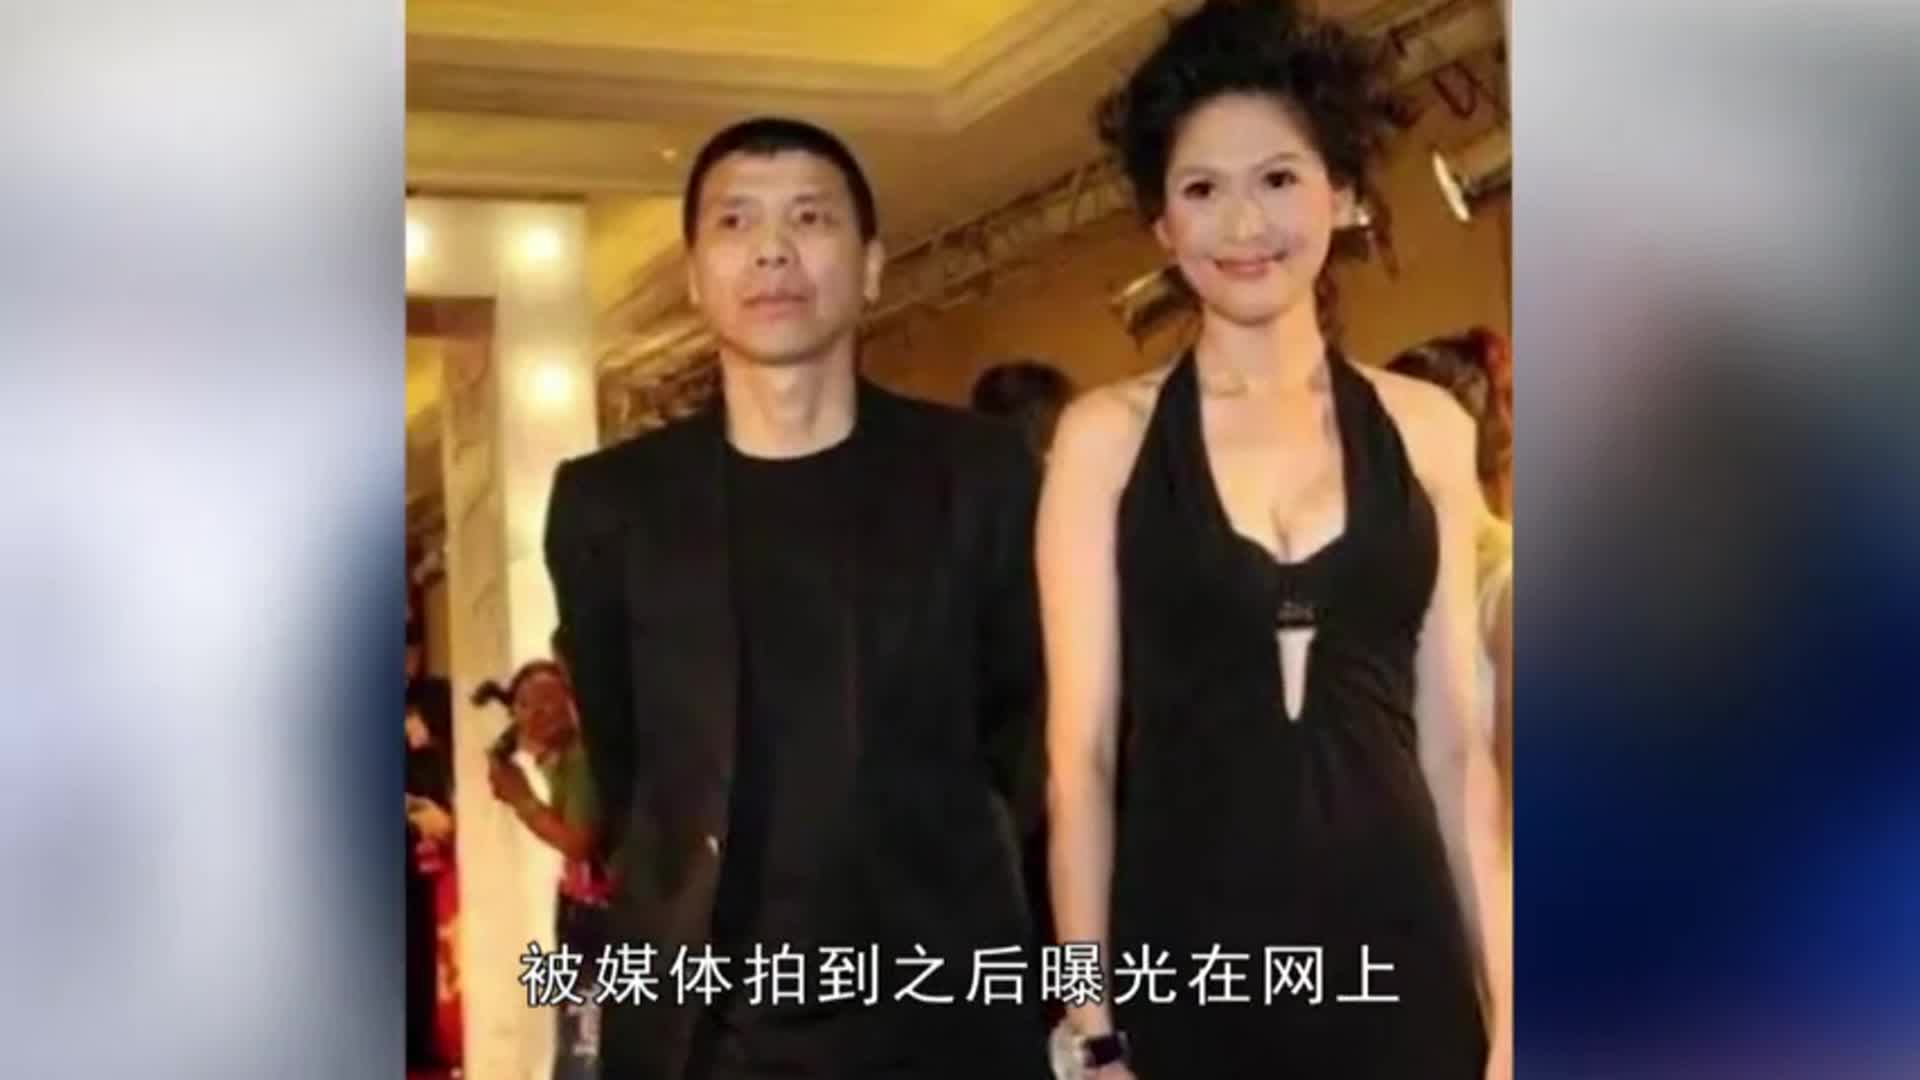 She was beaten up by Feng Xiaogang's ruined future and her marriage with Xu Fan. She is still single at the age of 39.